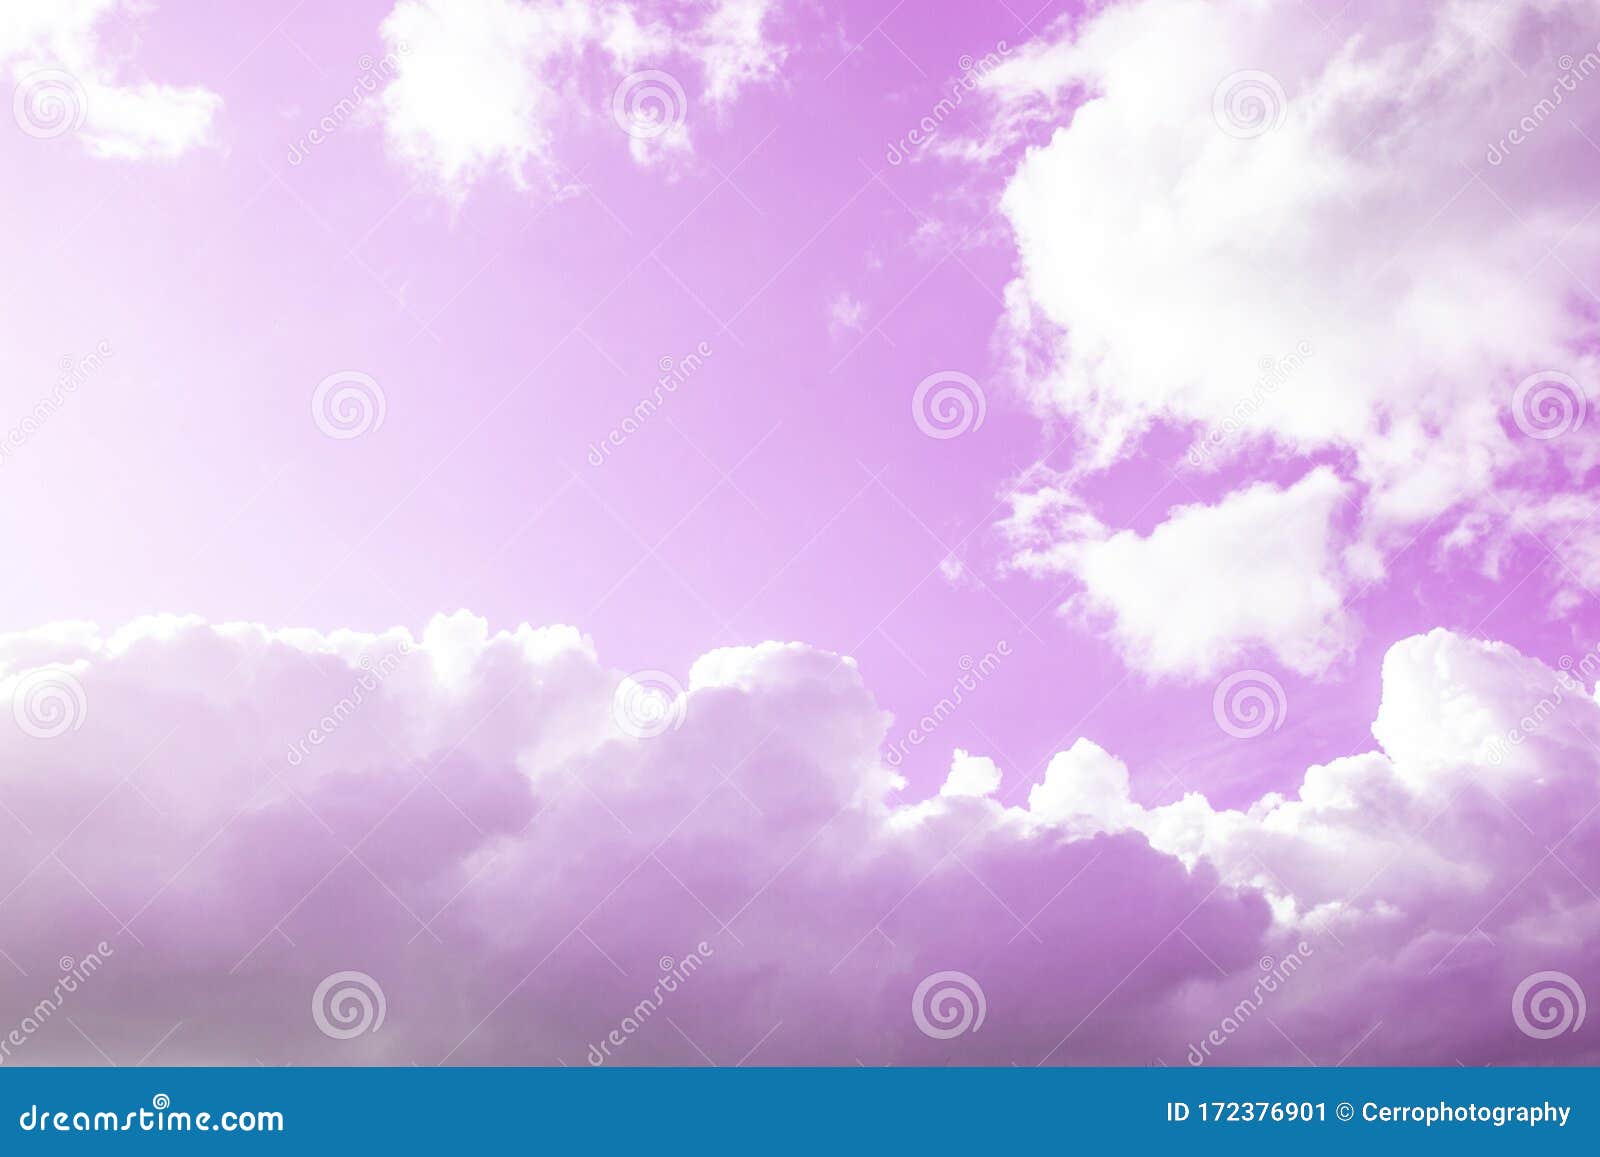 Purple and Pink Clouds and Sky, Soft Bright Background Stock Image ...